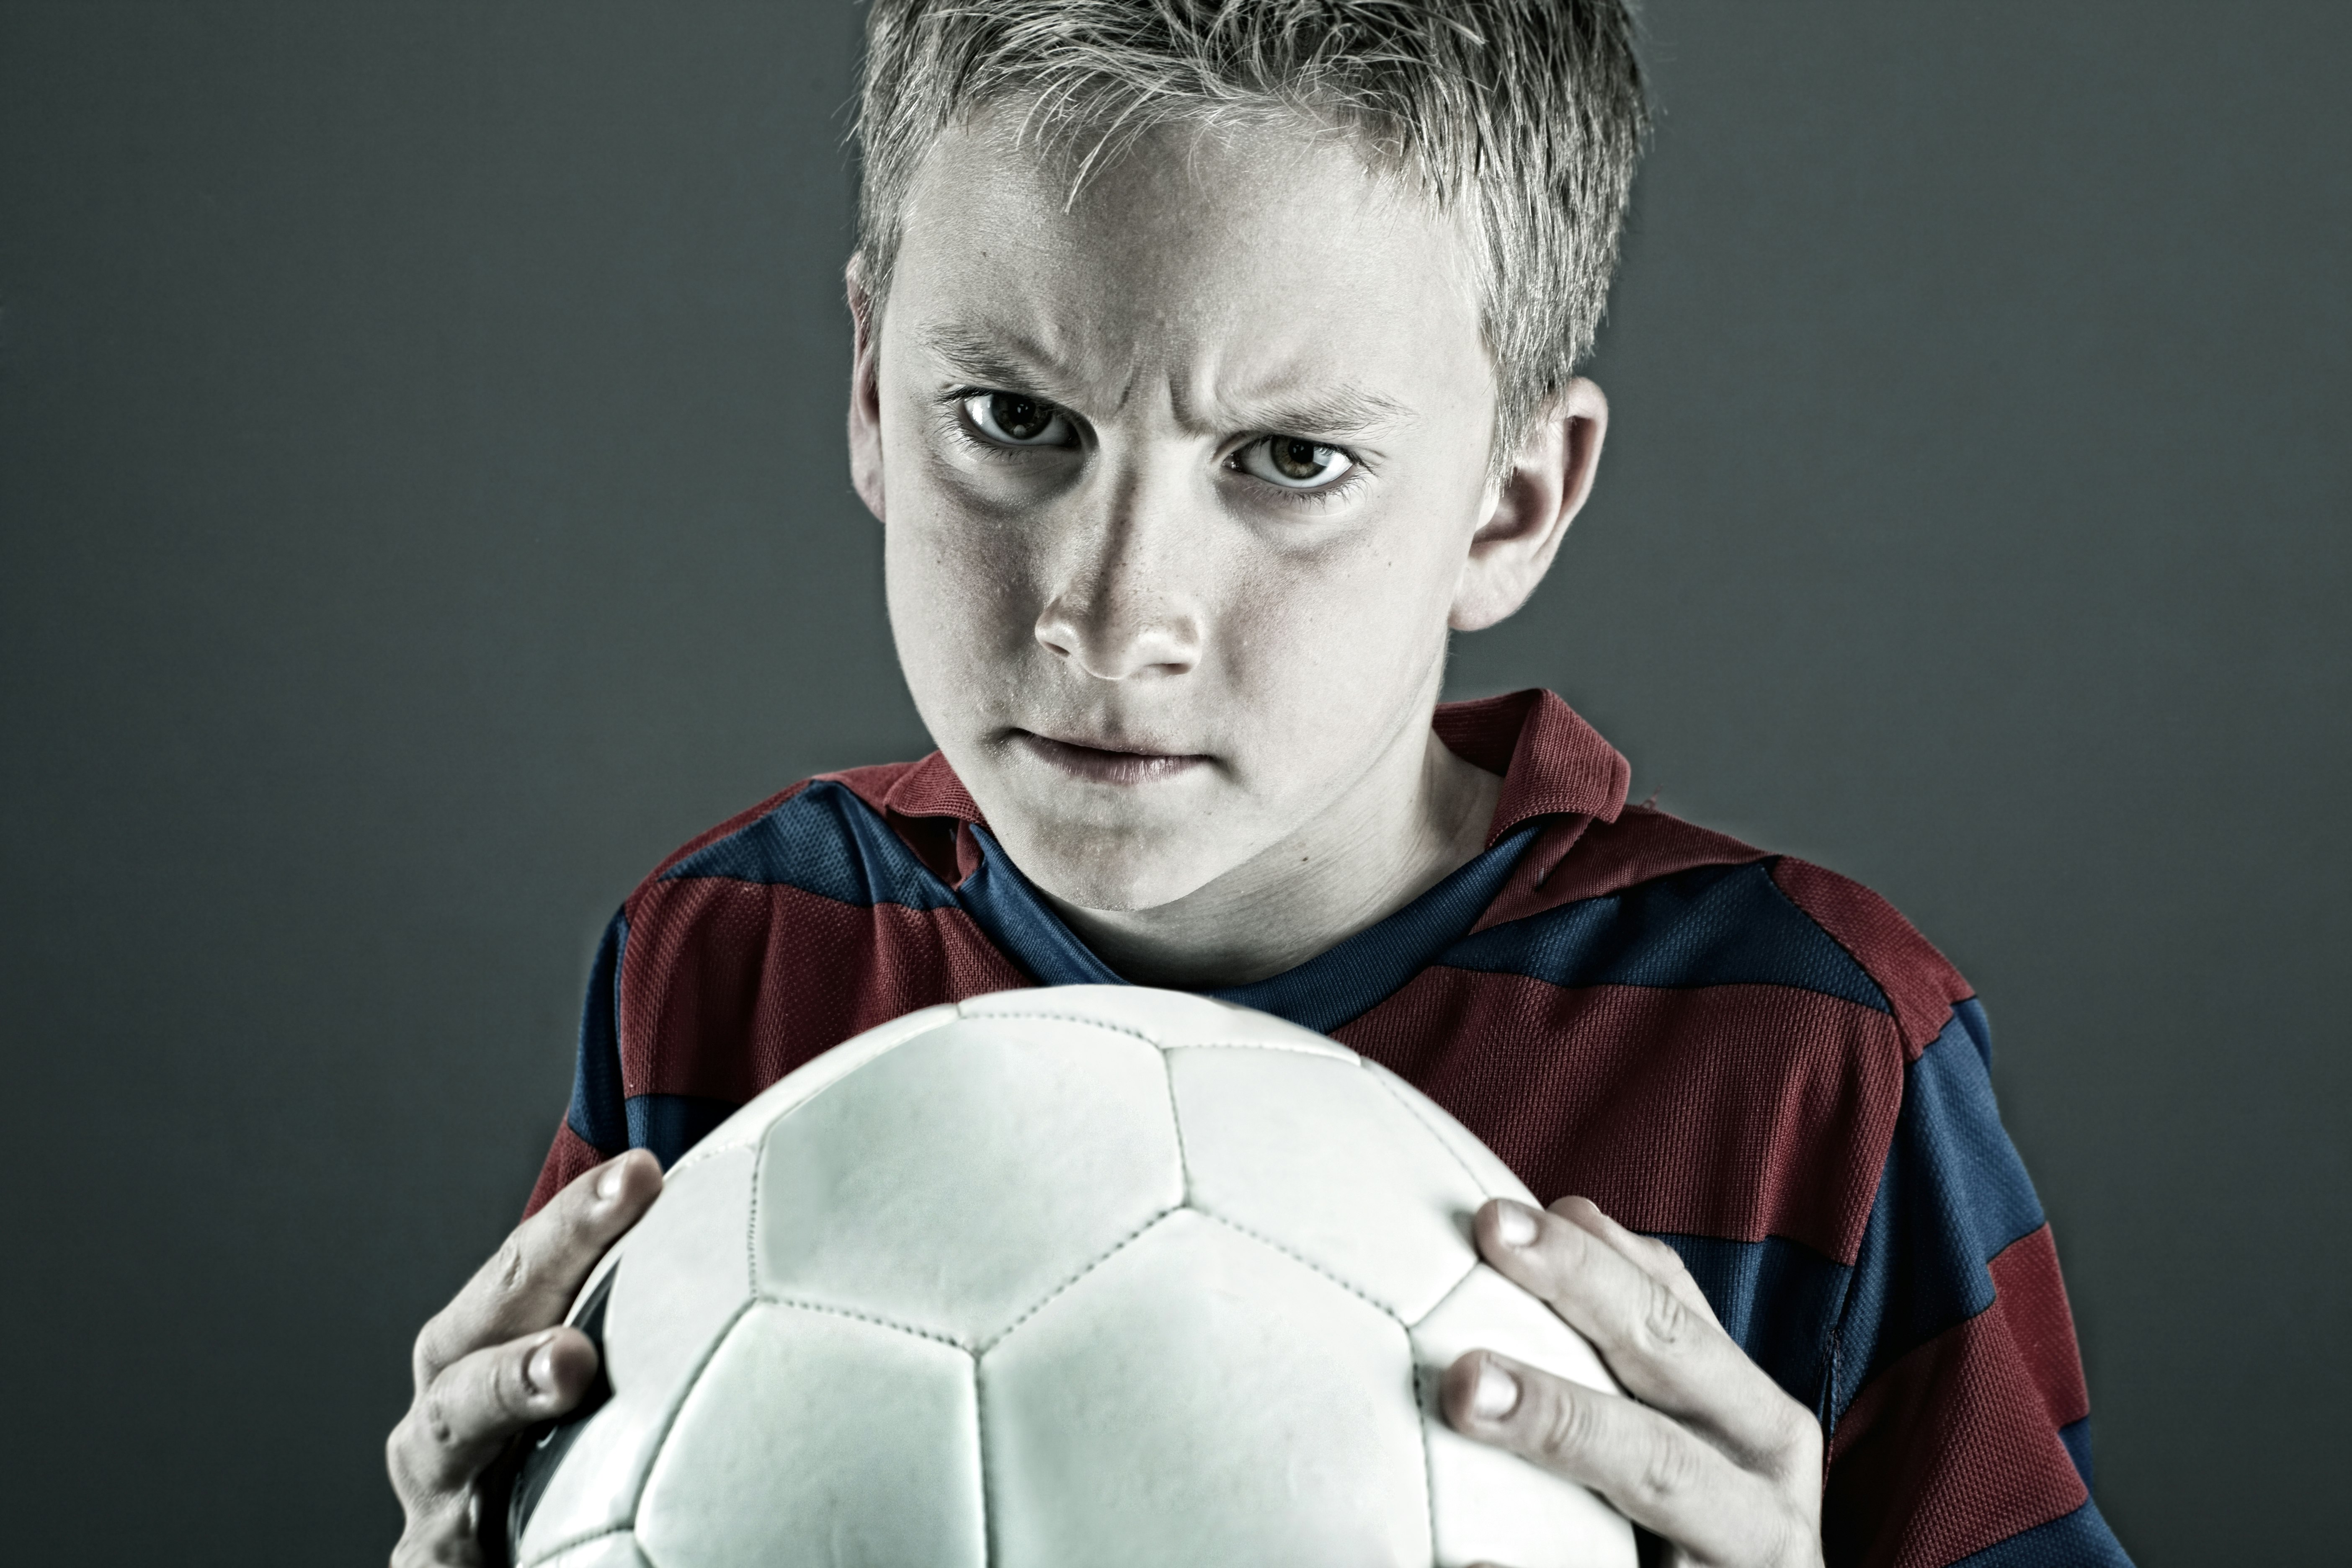 boy in blue and red jersey shirt holding white soccer ball